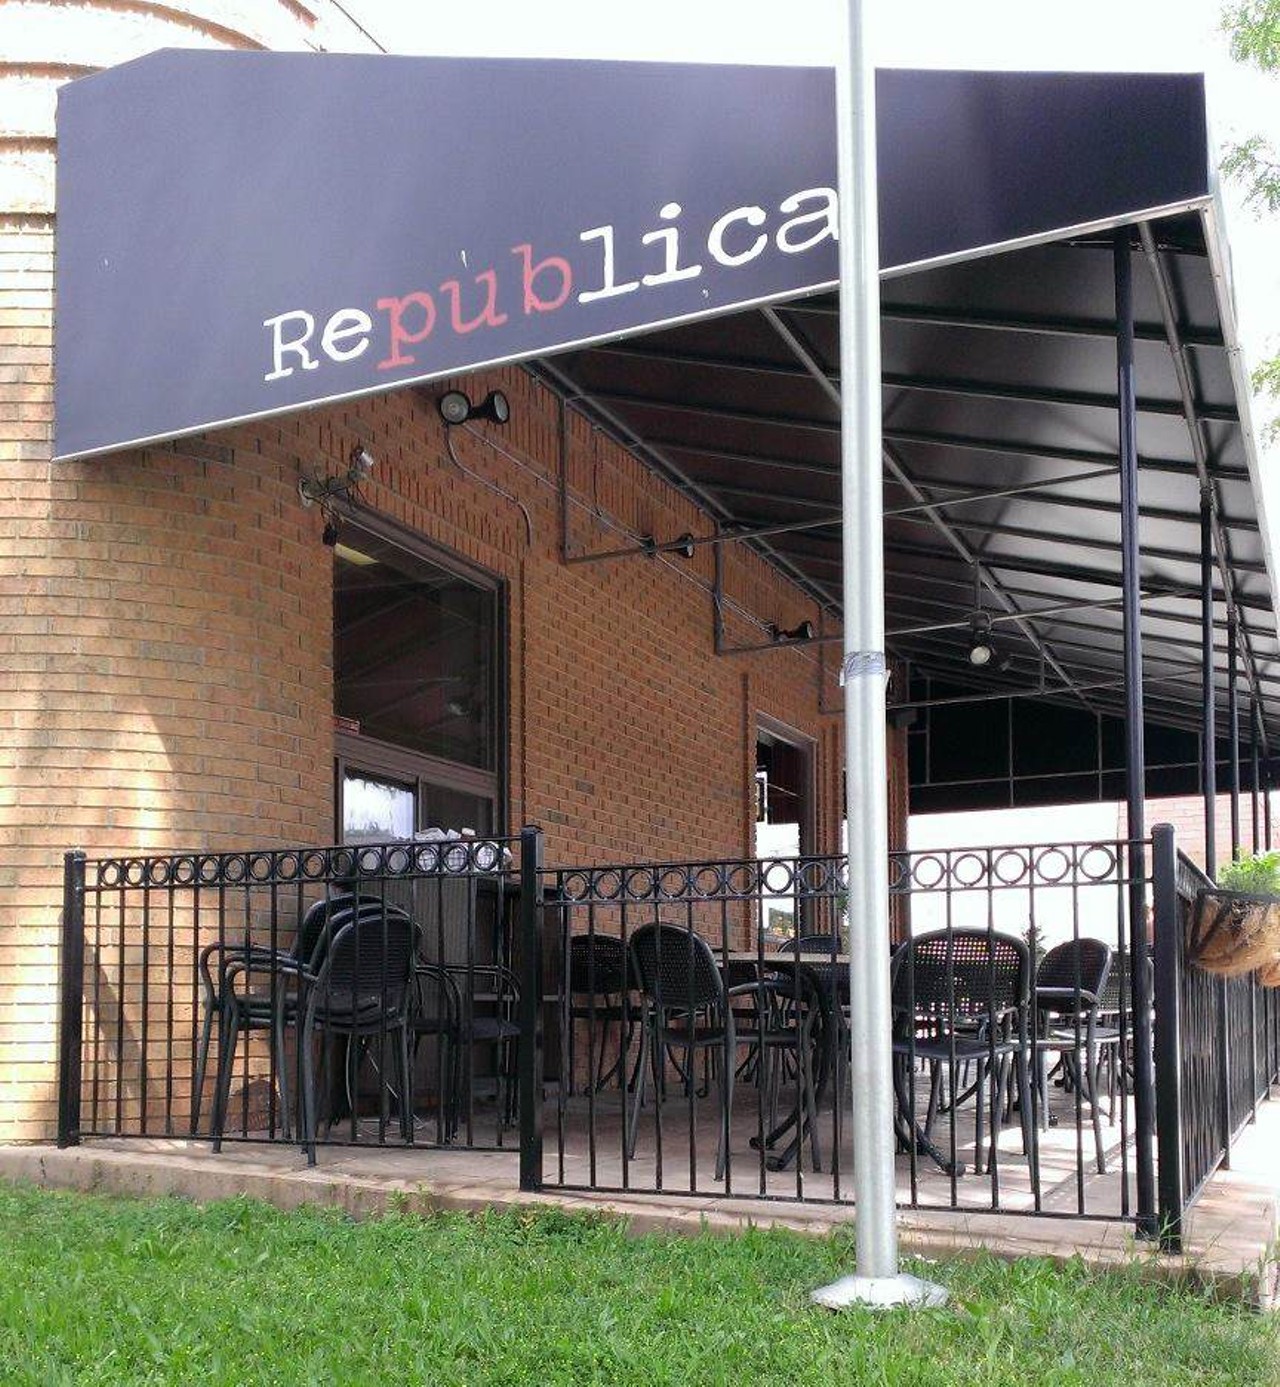 Republica
Lover of food? This is where you should be. With Michigan craft beer and options for carnivores and vegetarians, there&#146;s something for everyone. The small patio is open during the summer months and provides the perfect ambiance for anyone looking for a chill meal with some friends. 
1999 Coolidge Hwy., Berkley
248-268-3175
Photo courtesy of Republica Facebook